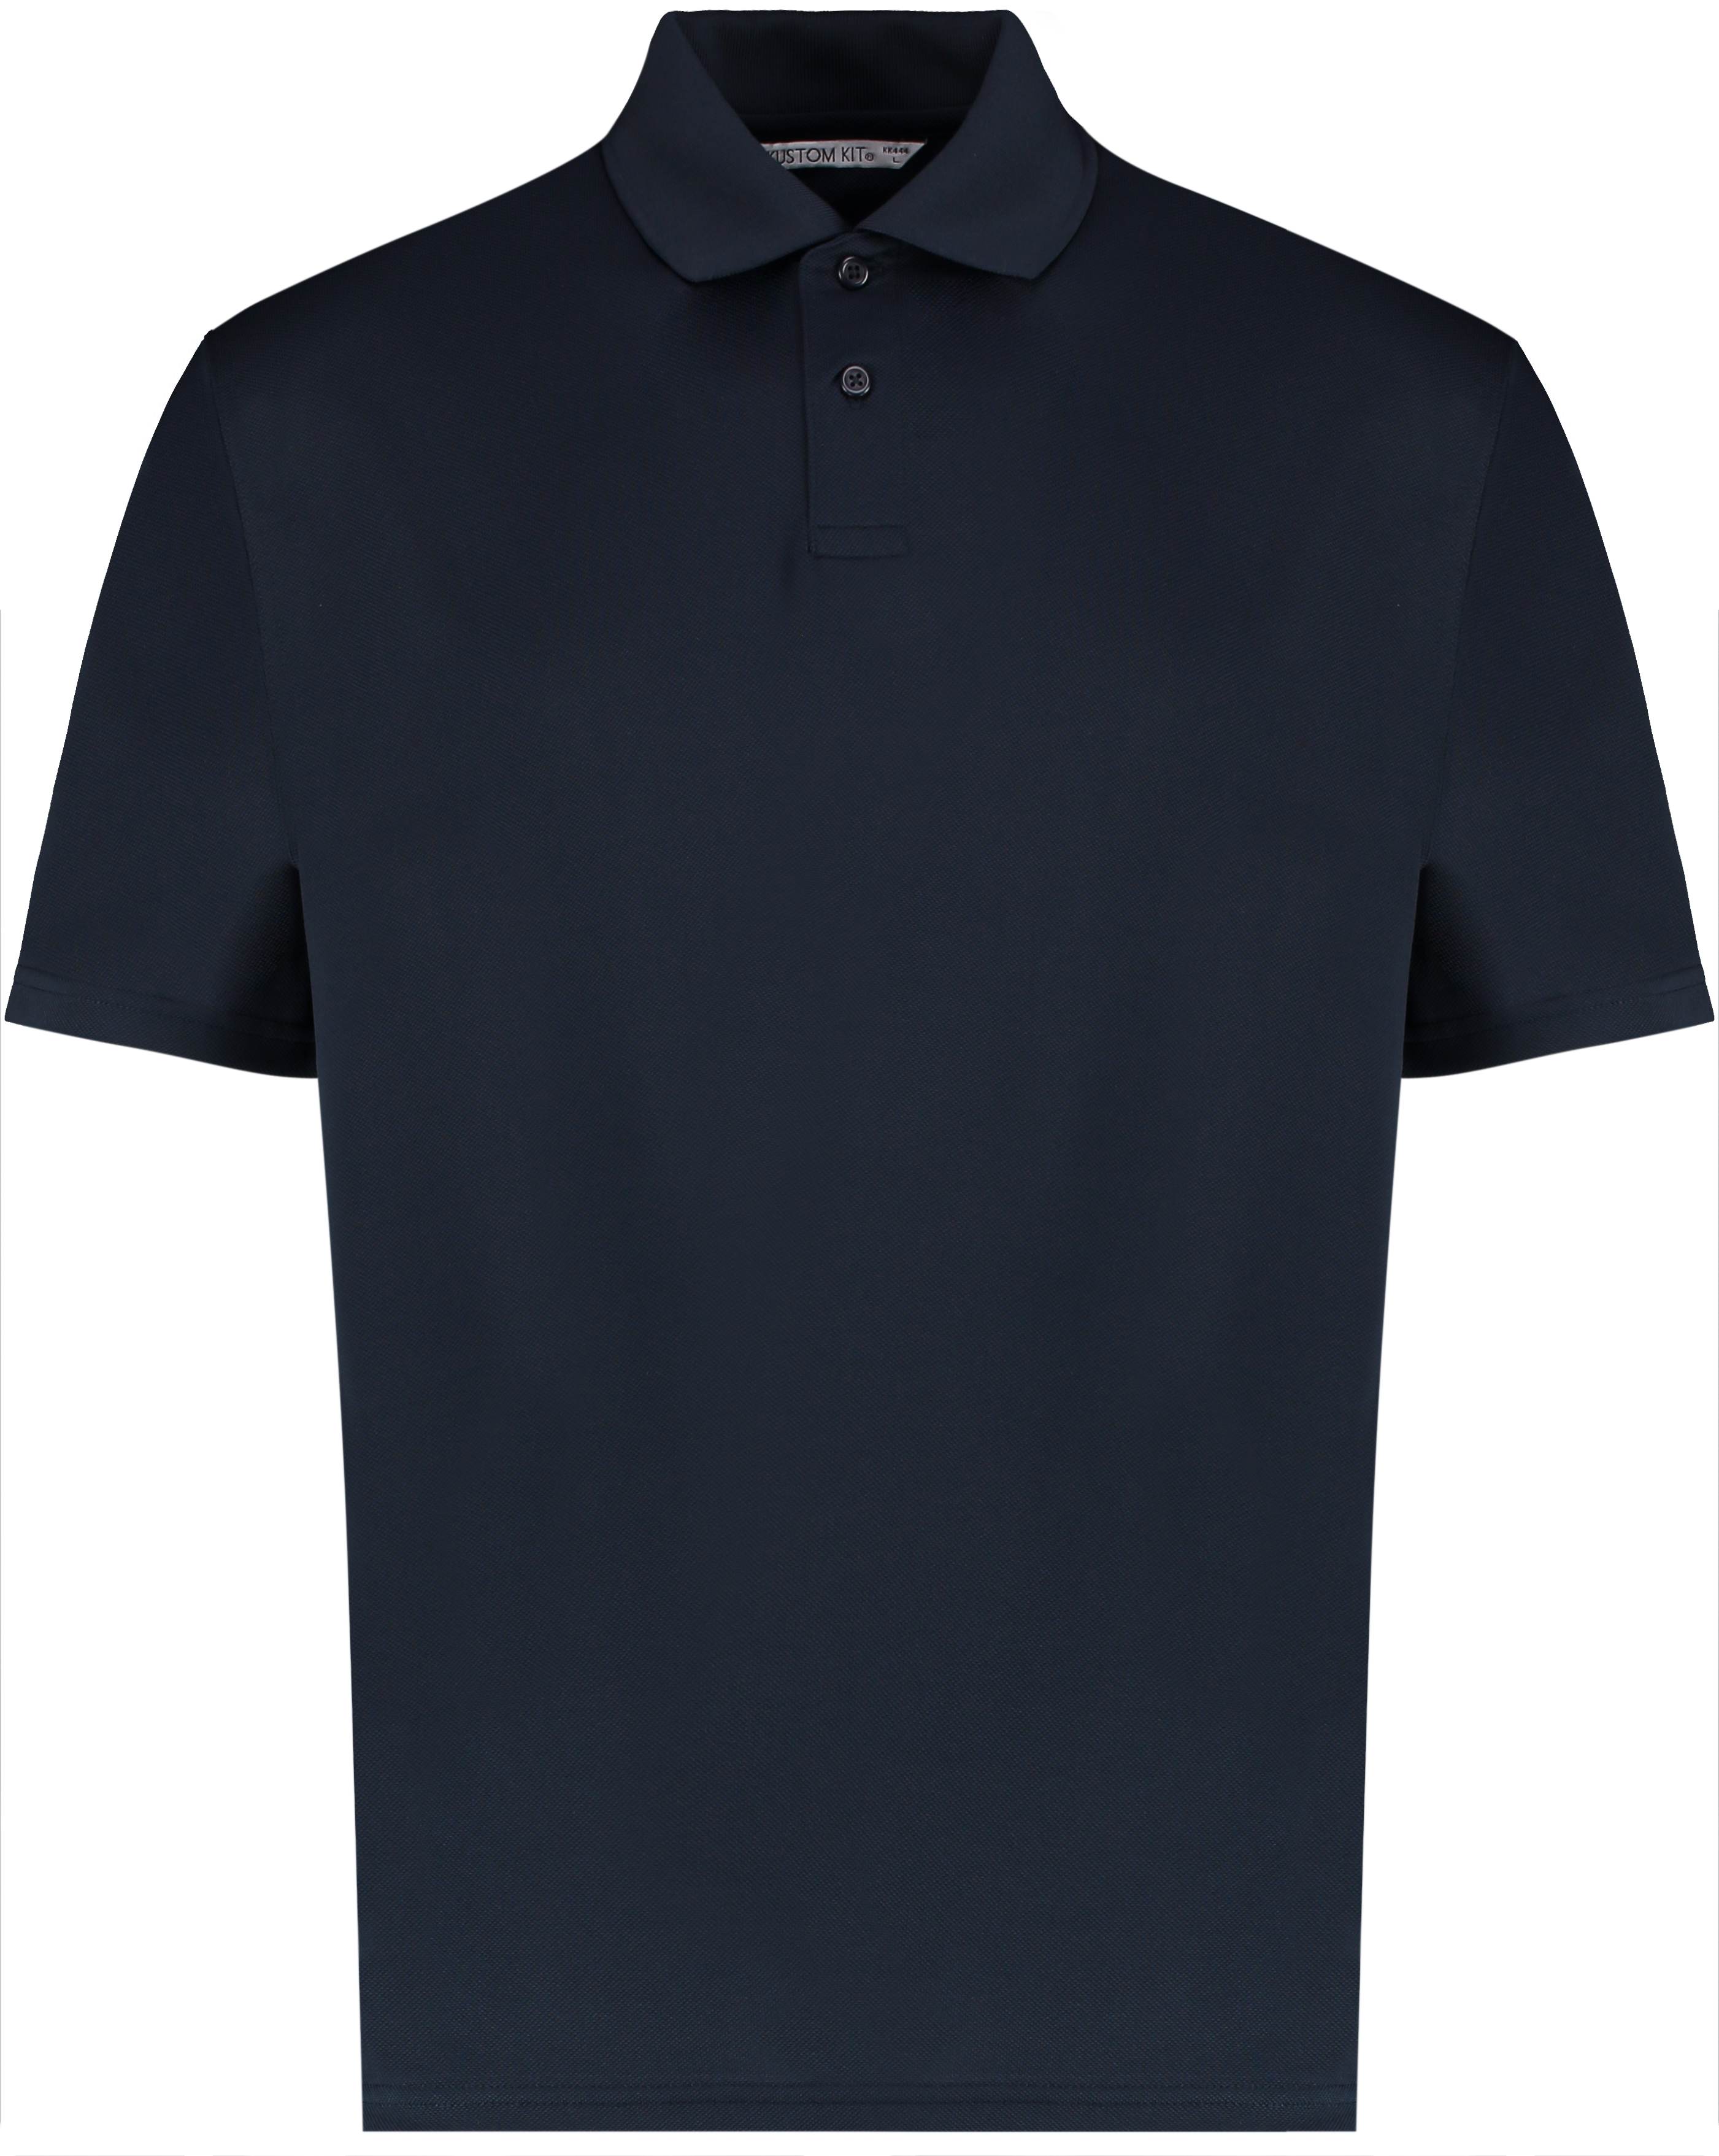 ax-httpswebsystems.s3.amazonaws.comtmp_for_downloadkustom-kit-cooltex-plus-pique-polo-navy.jpg